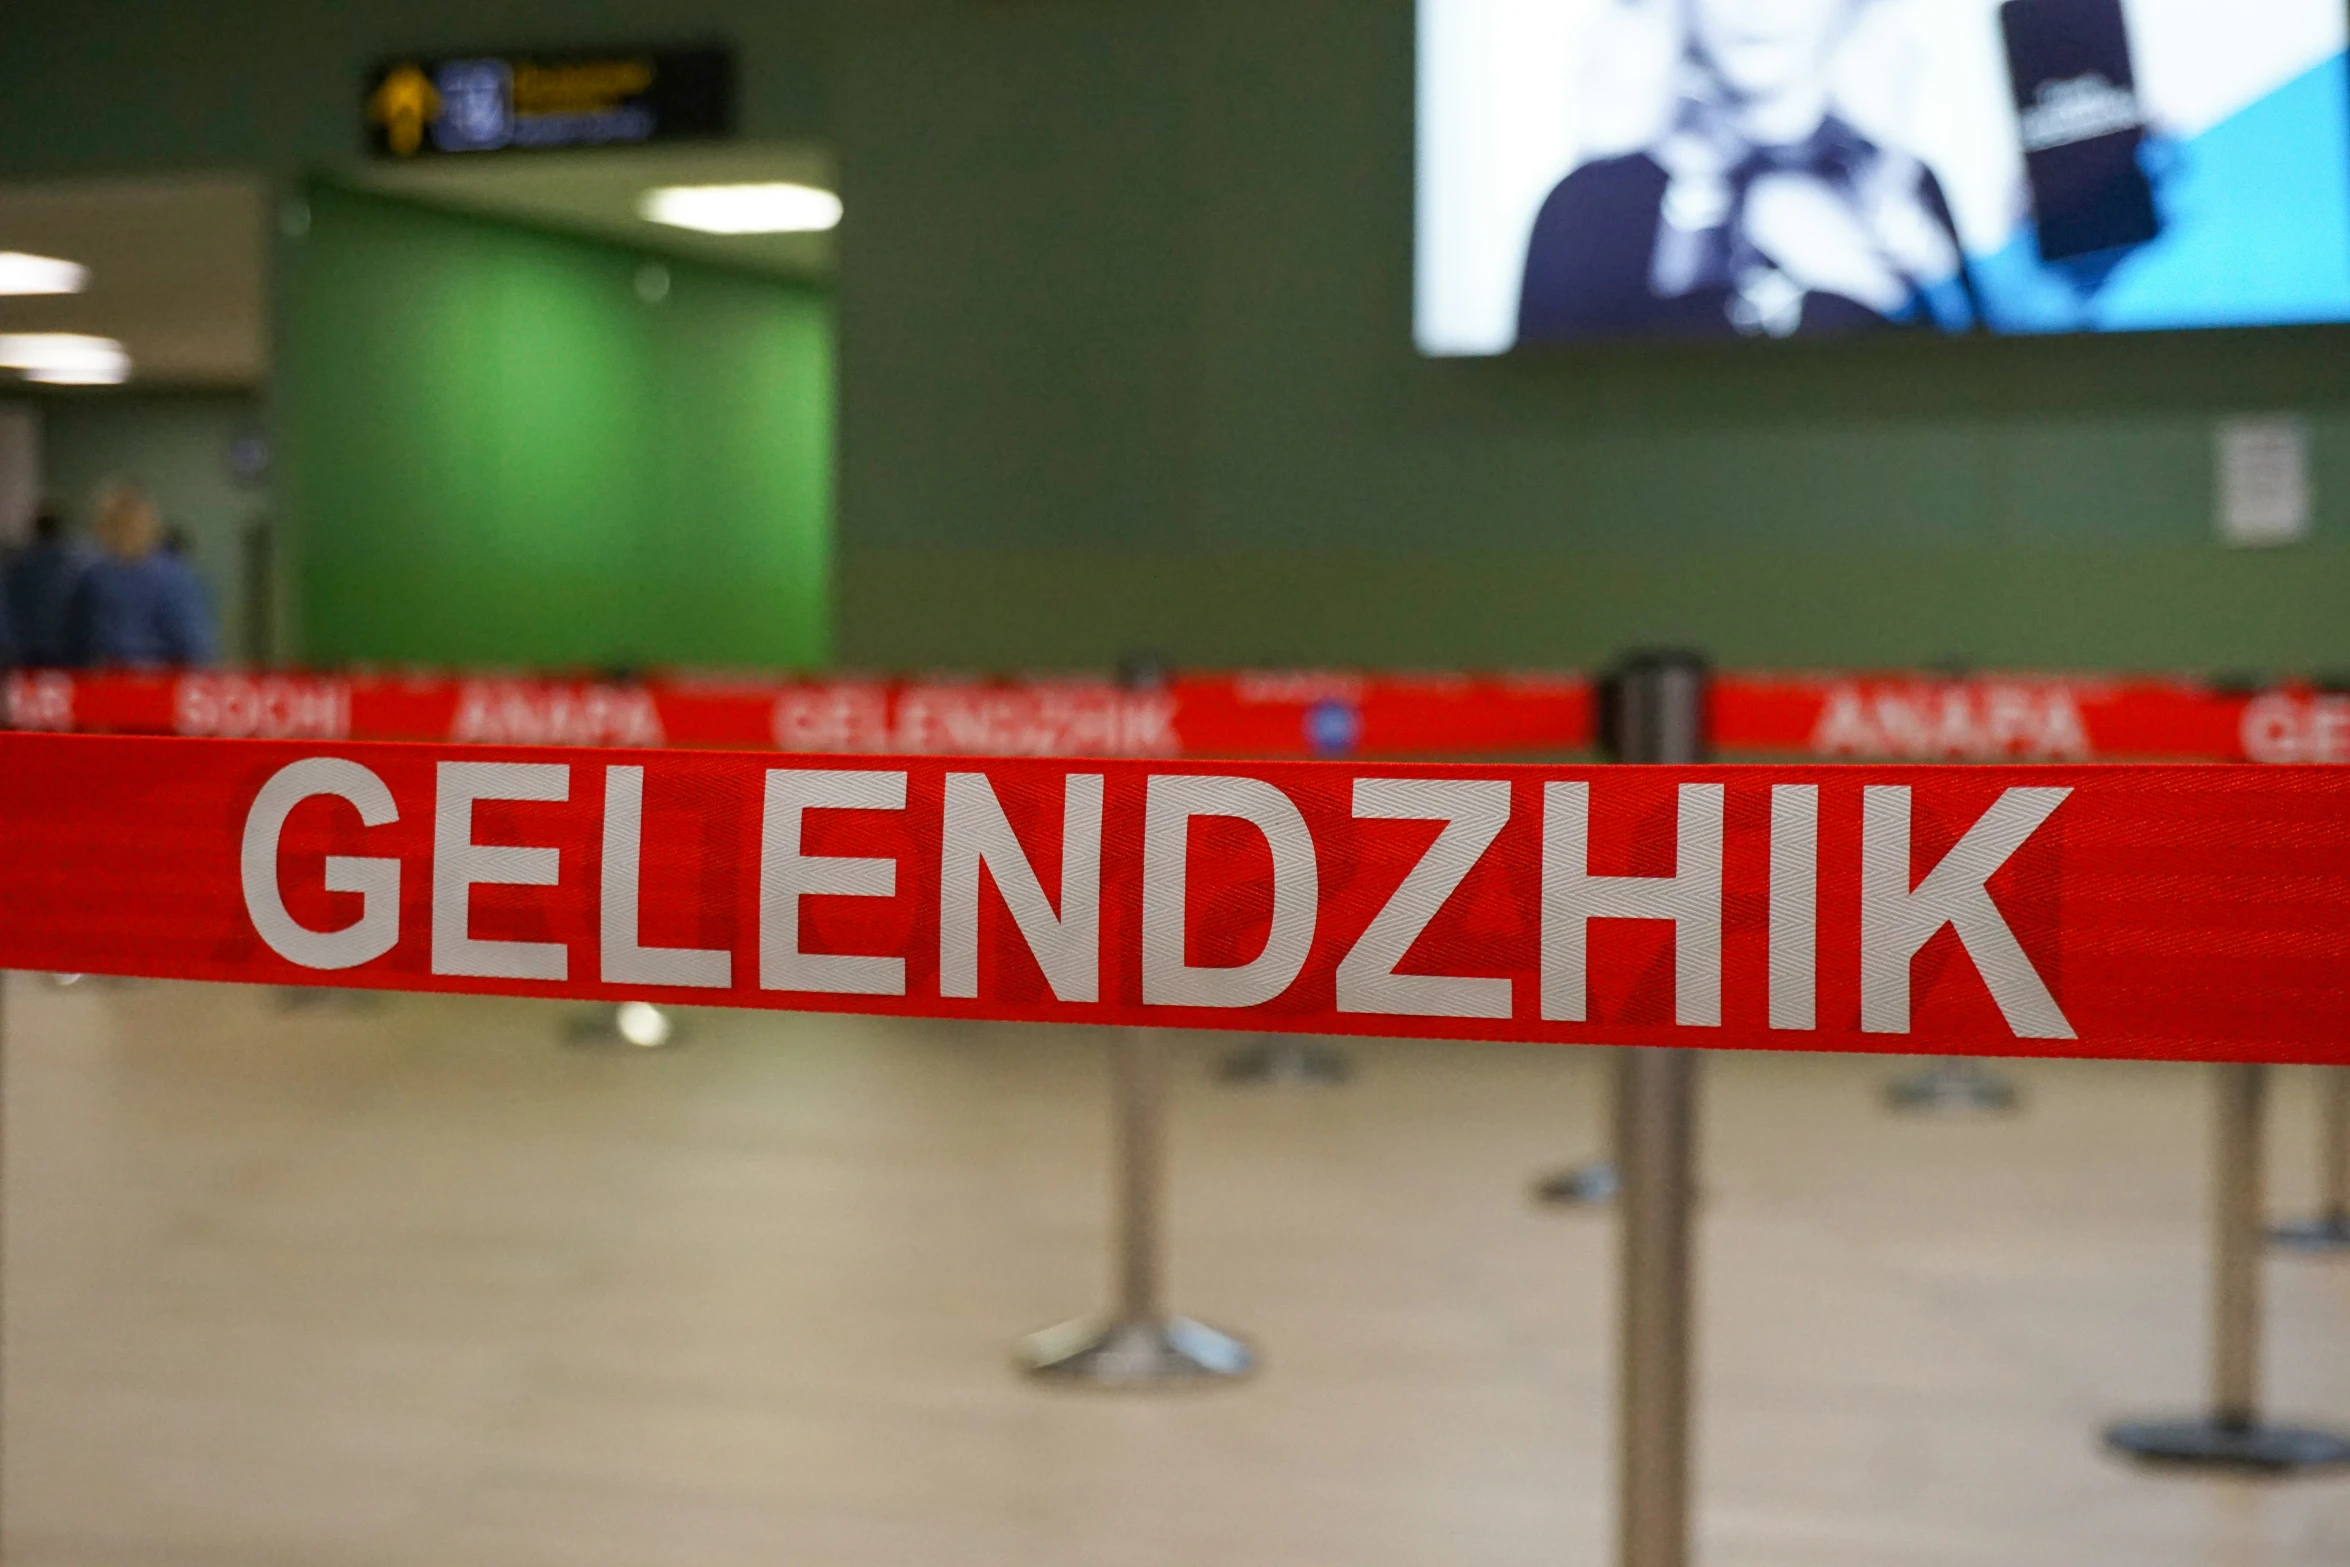 a sign is placed in the airport with a red bar